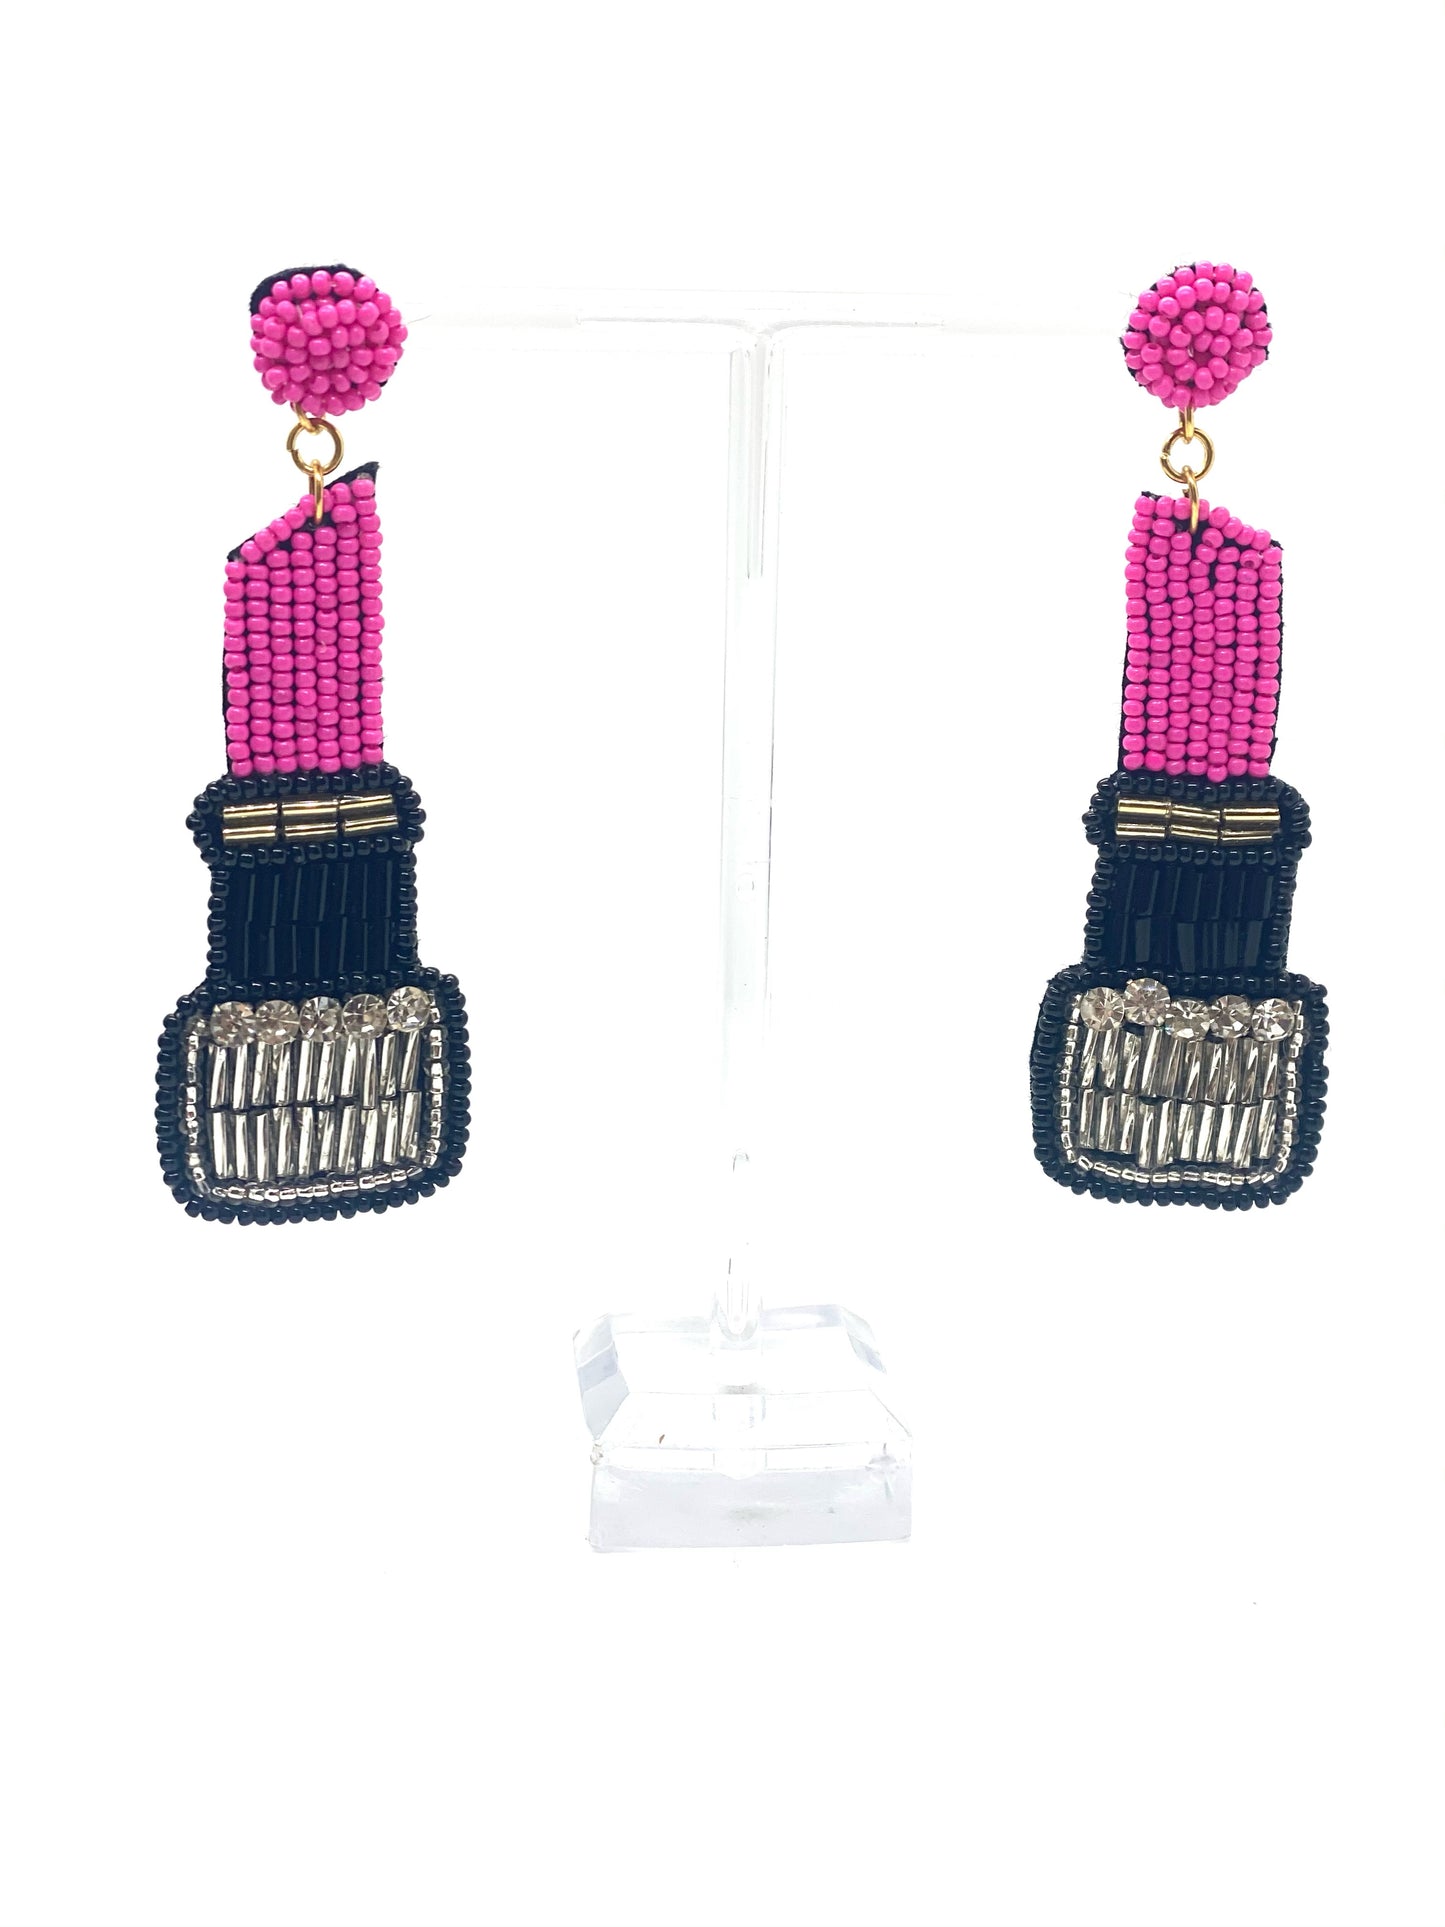 Brighten any day with a shade of pink. After all, you are never fully dressed without your favorite pink lipstick on. These beaded earrings feature a touch of sparkle to brighten your look. Choose your go-to shade: Hot Pink or Light Pink. You can’t go wrong with either. These earrings are lightweight and feature a post back.